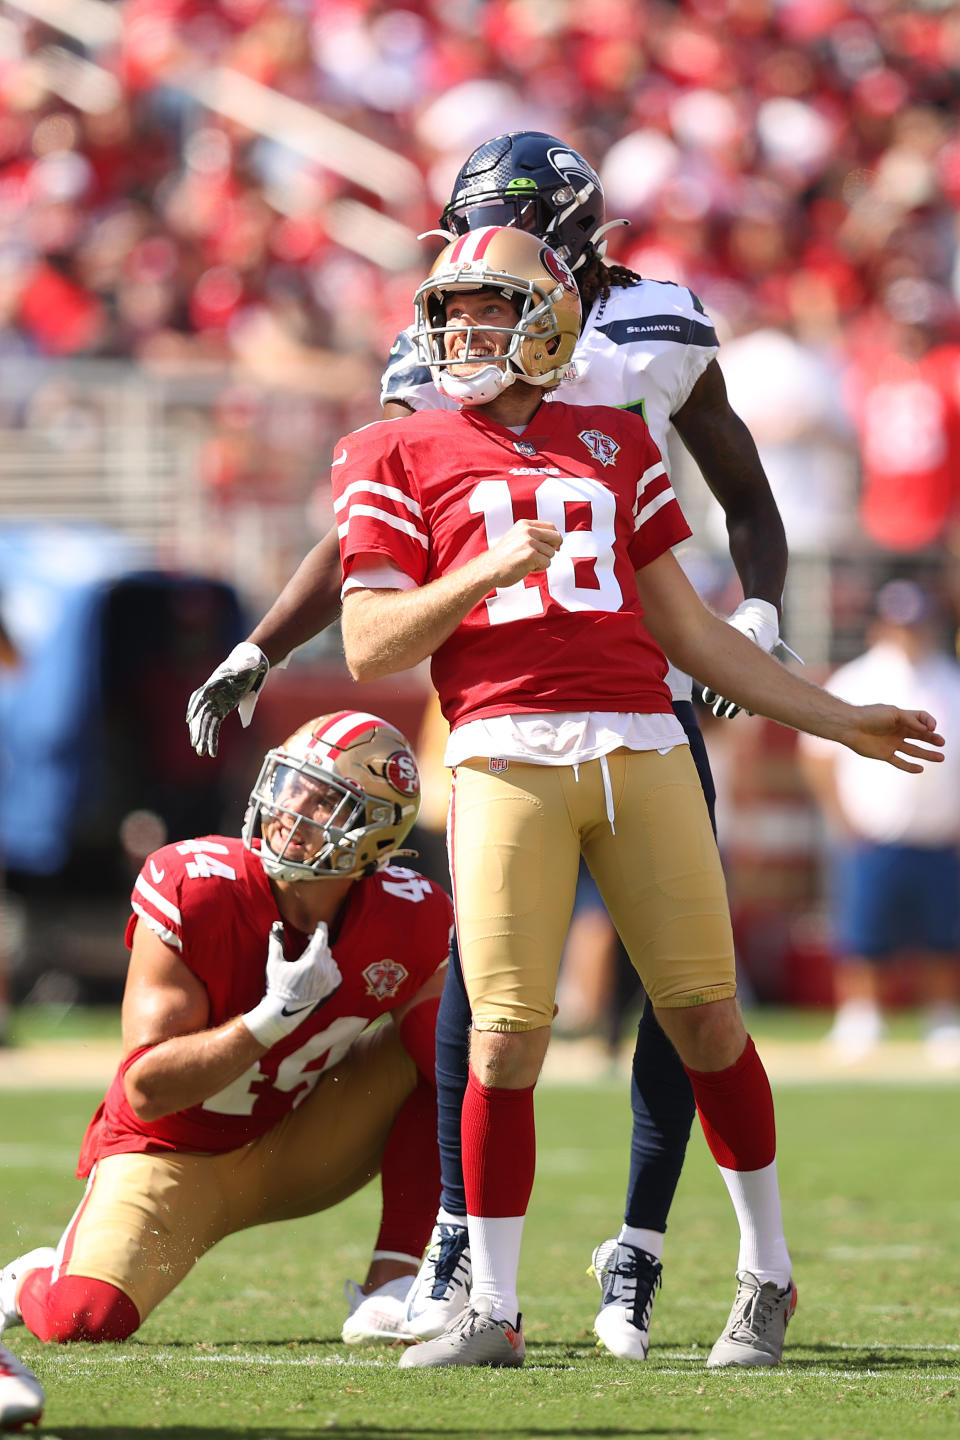 Mitch Wishnowsky (pictured) misses a field goal attempt during the second quarter against the Seattle Seahawks at Levi's Stadium on October 03, 2021 in Santa Clara, California.